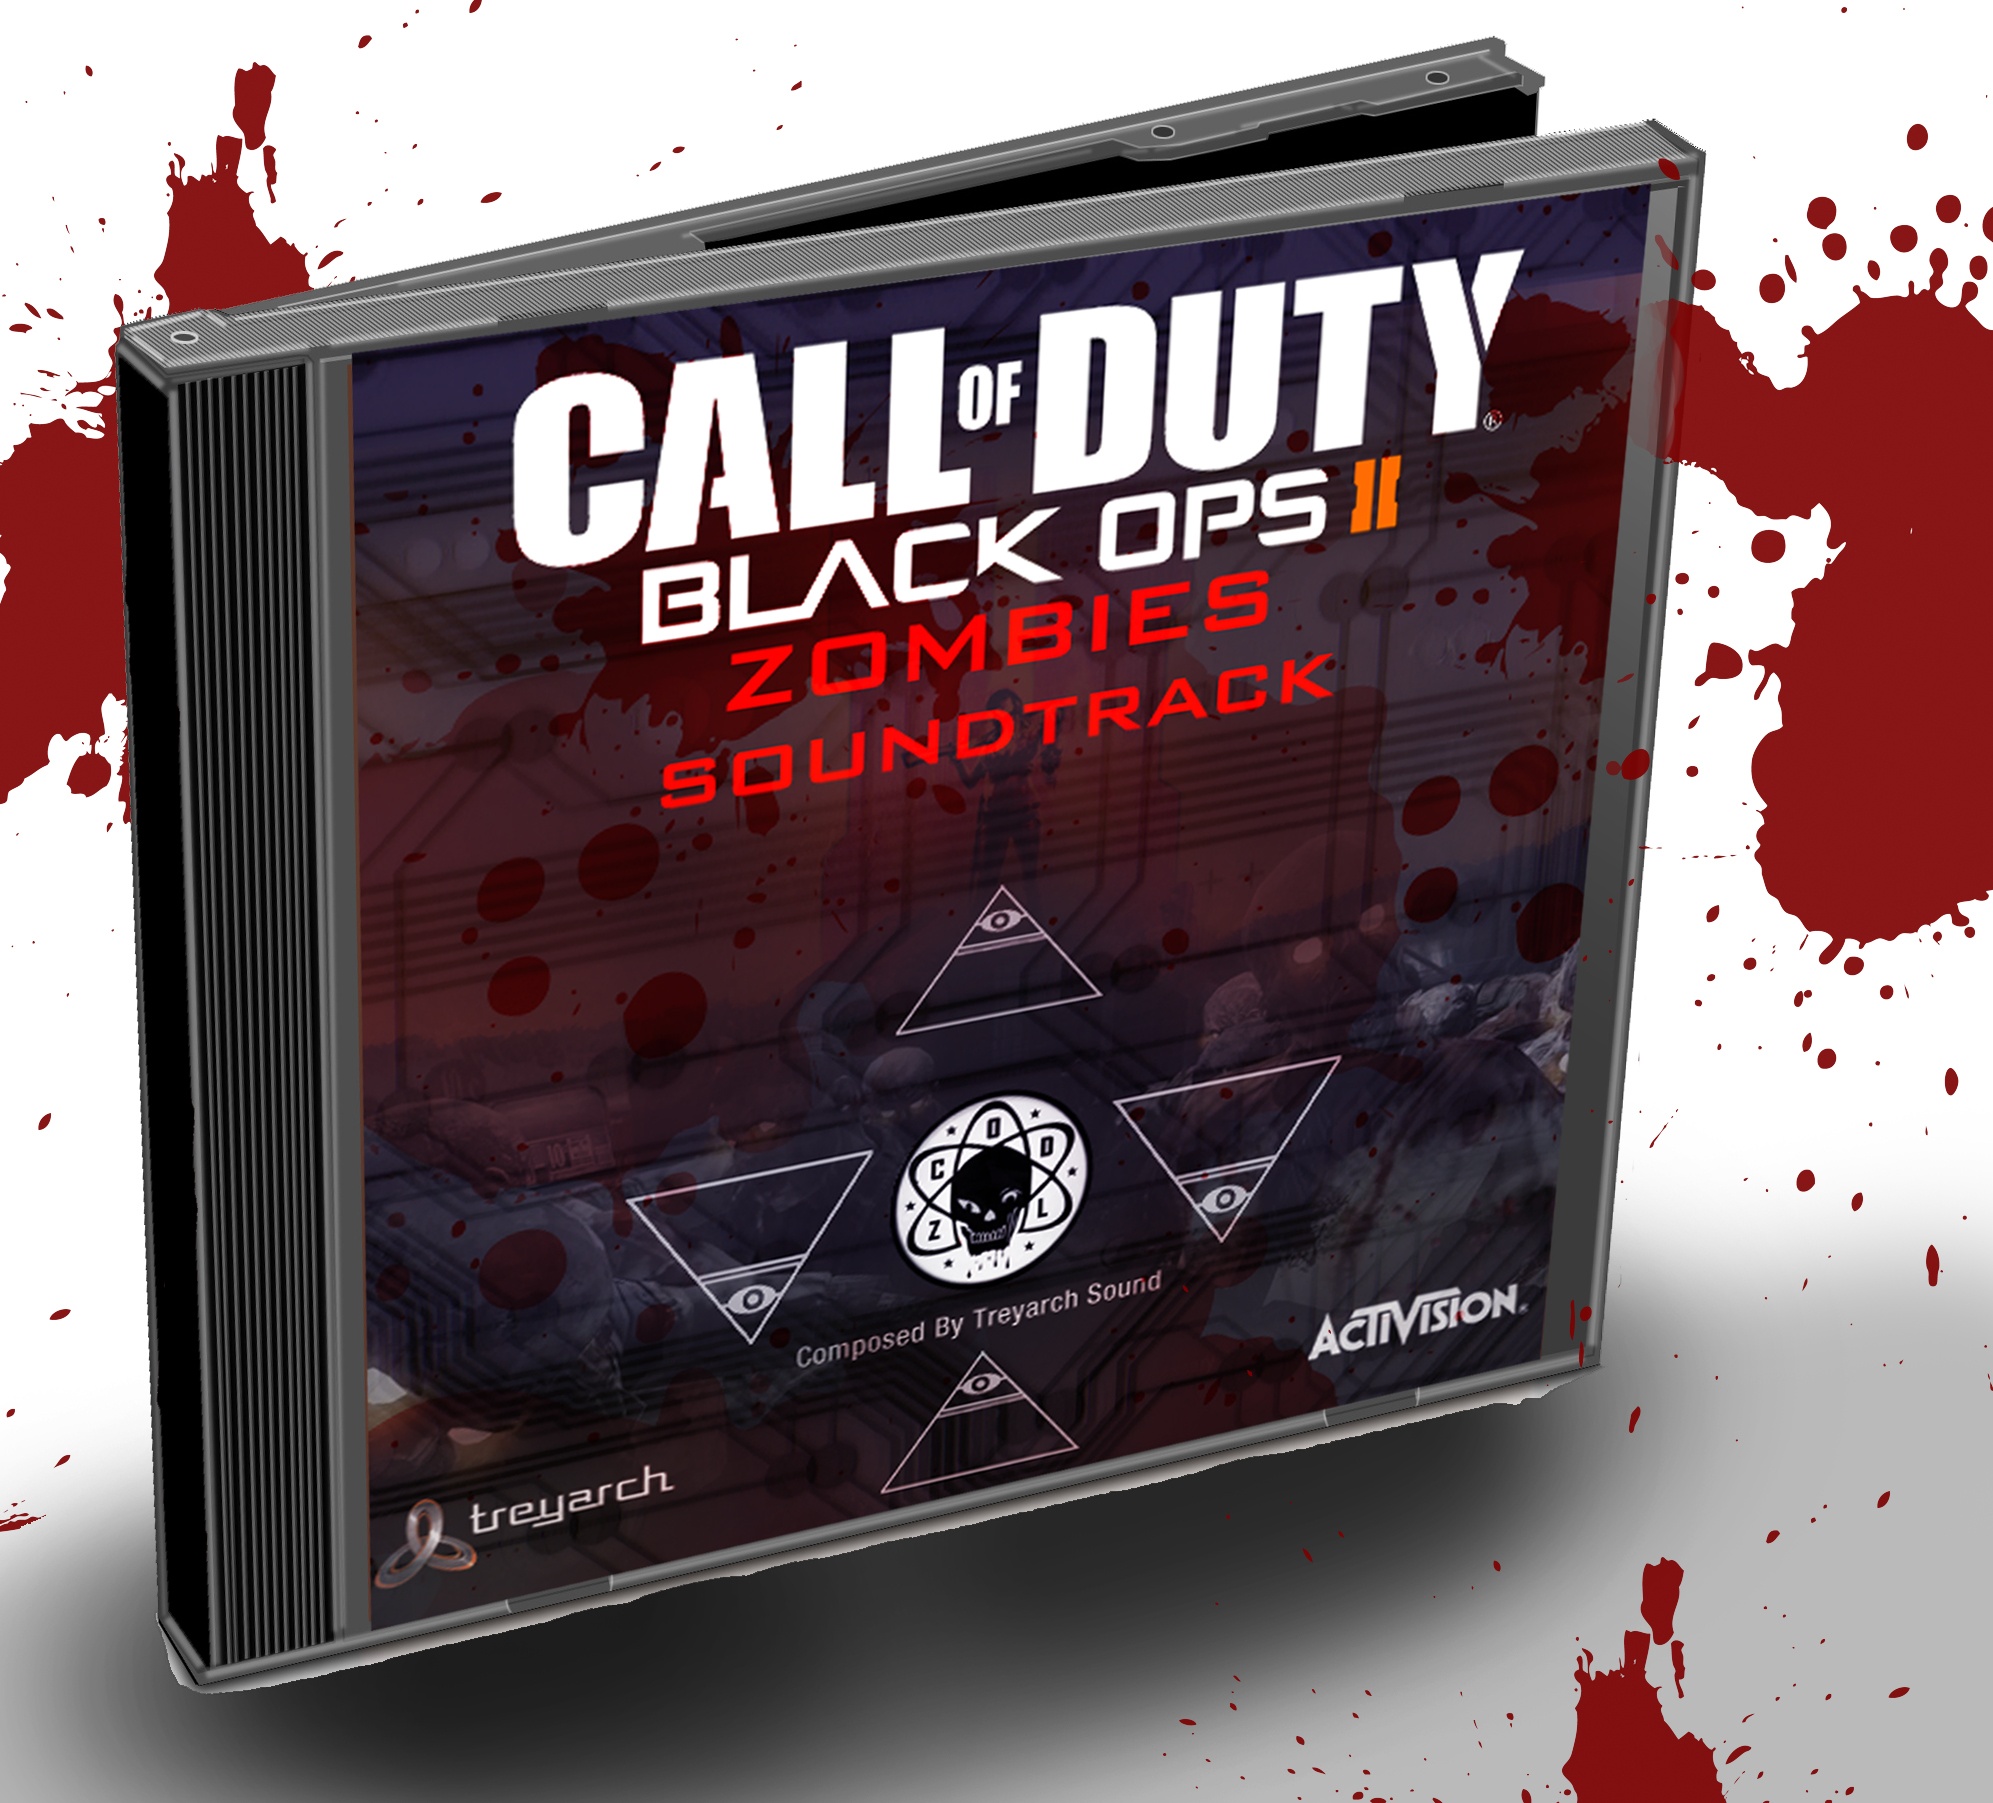 Black Ops 2 Zombie Soundtrack box cover